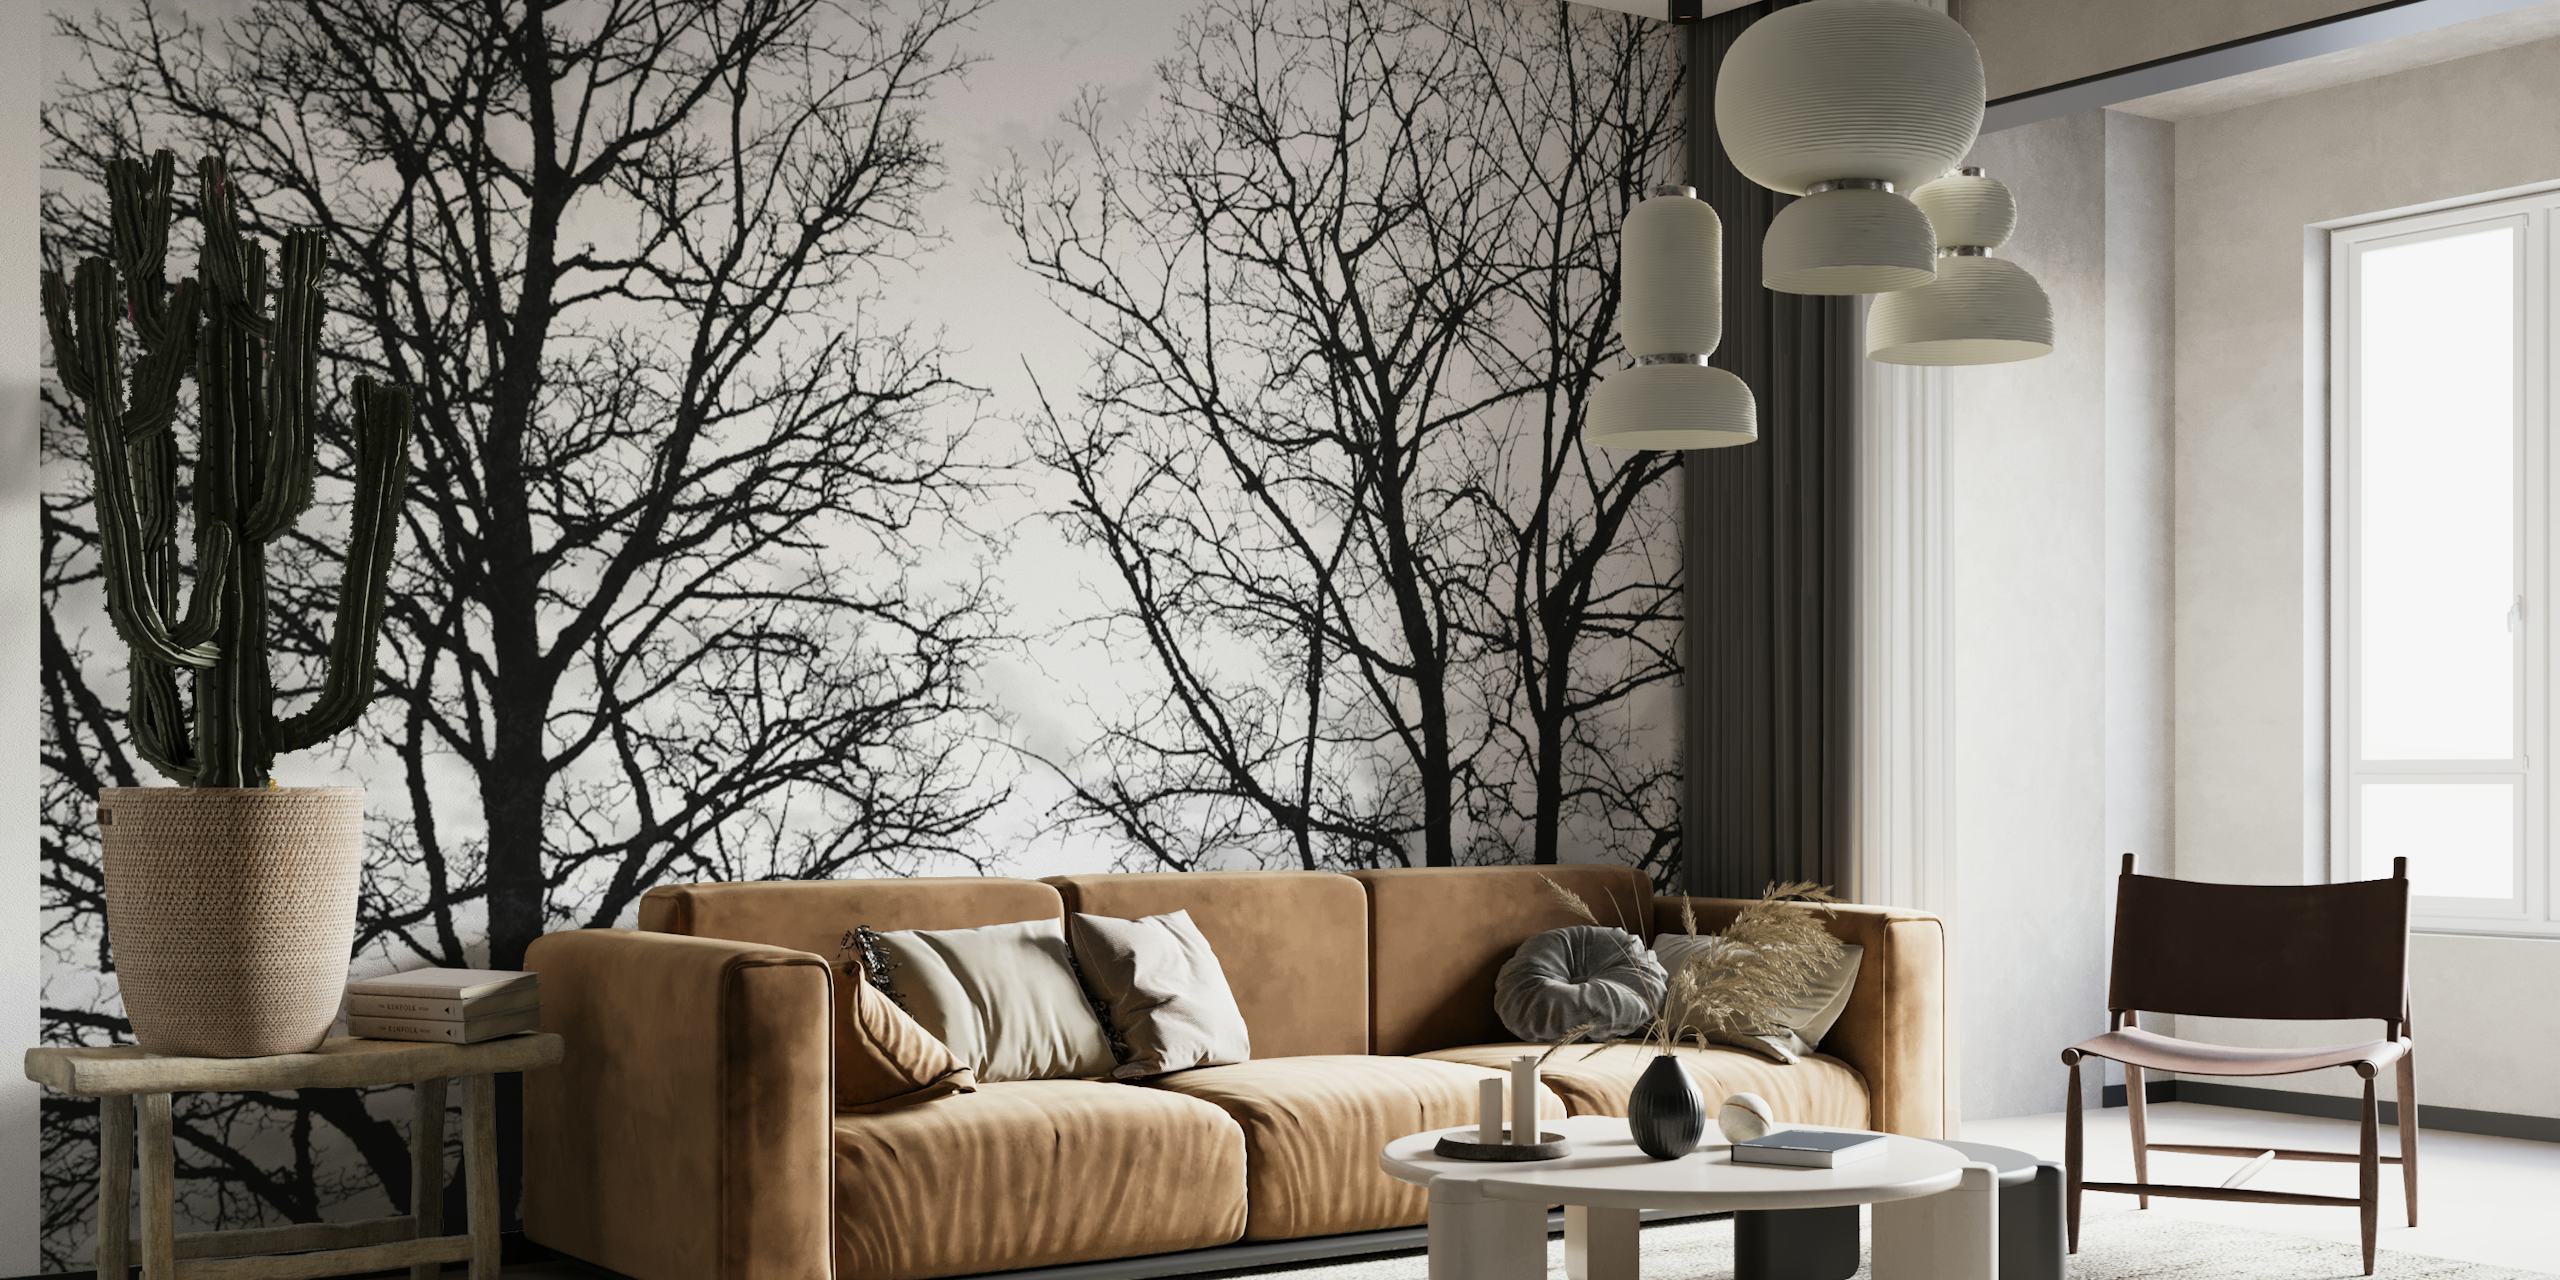 Monochrome tree silhouettes wall mural with intricate branch patterns